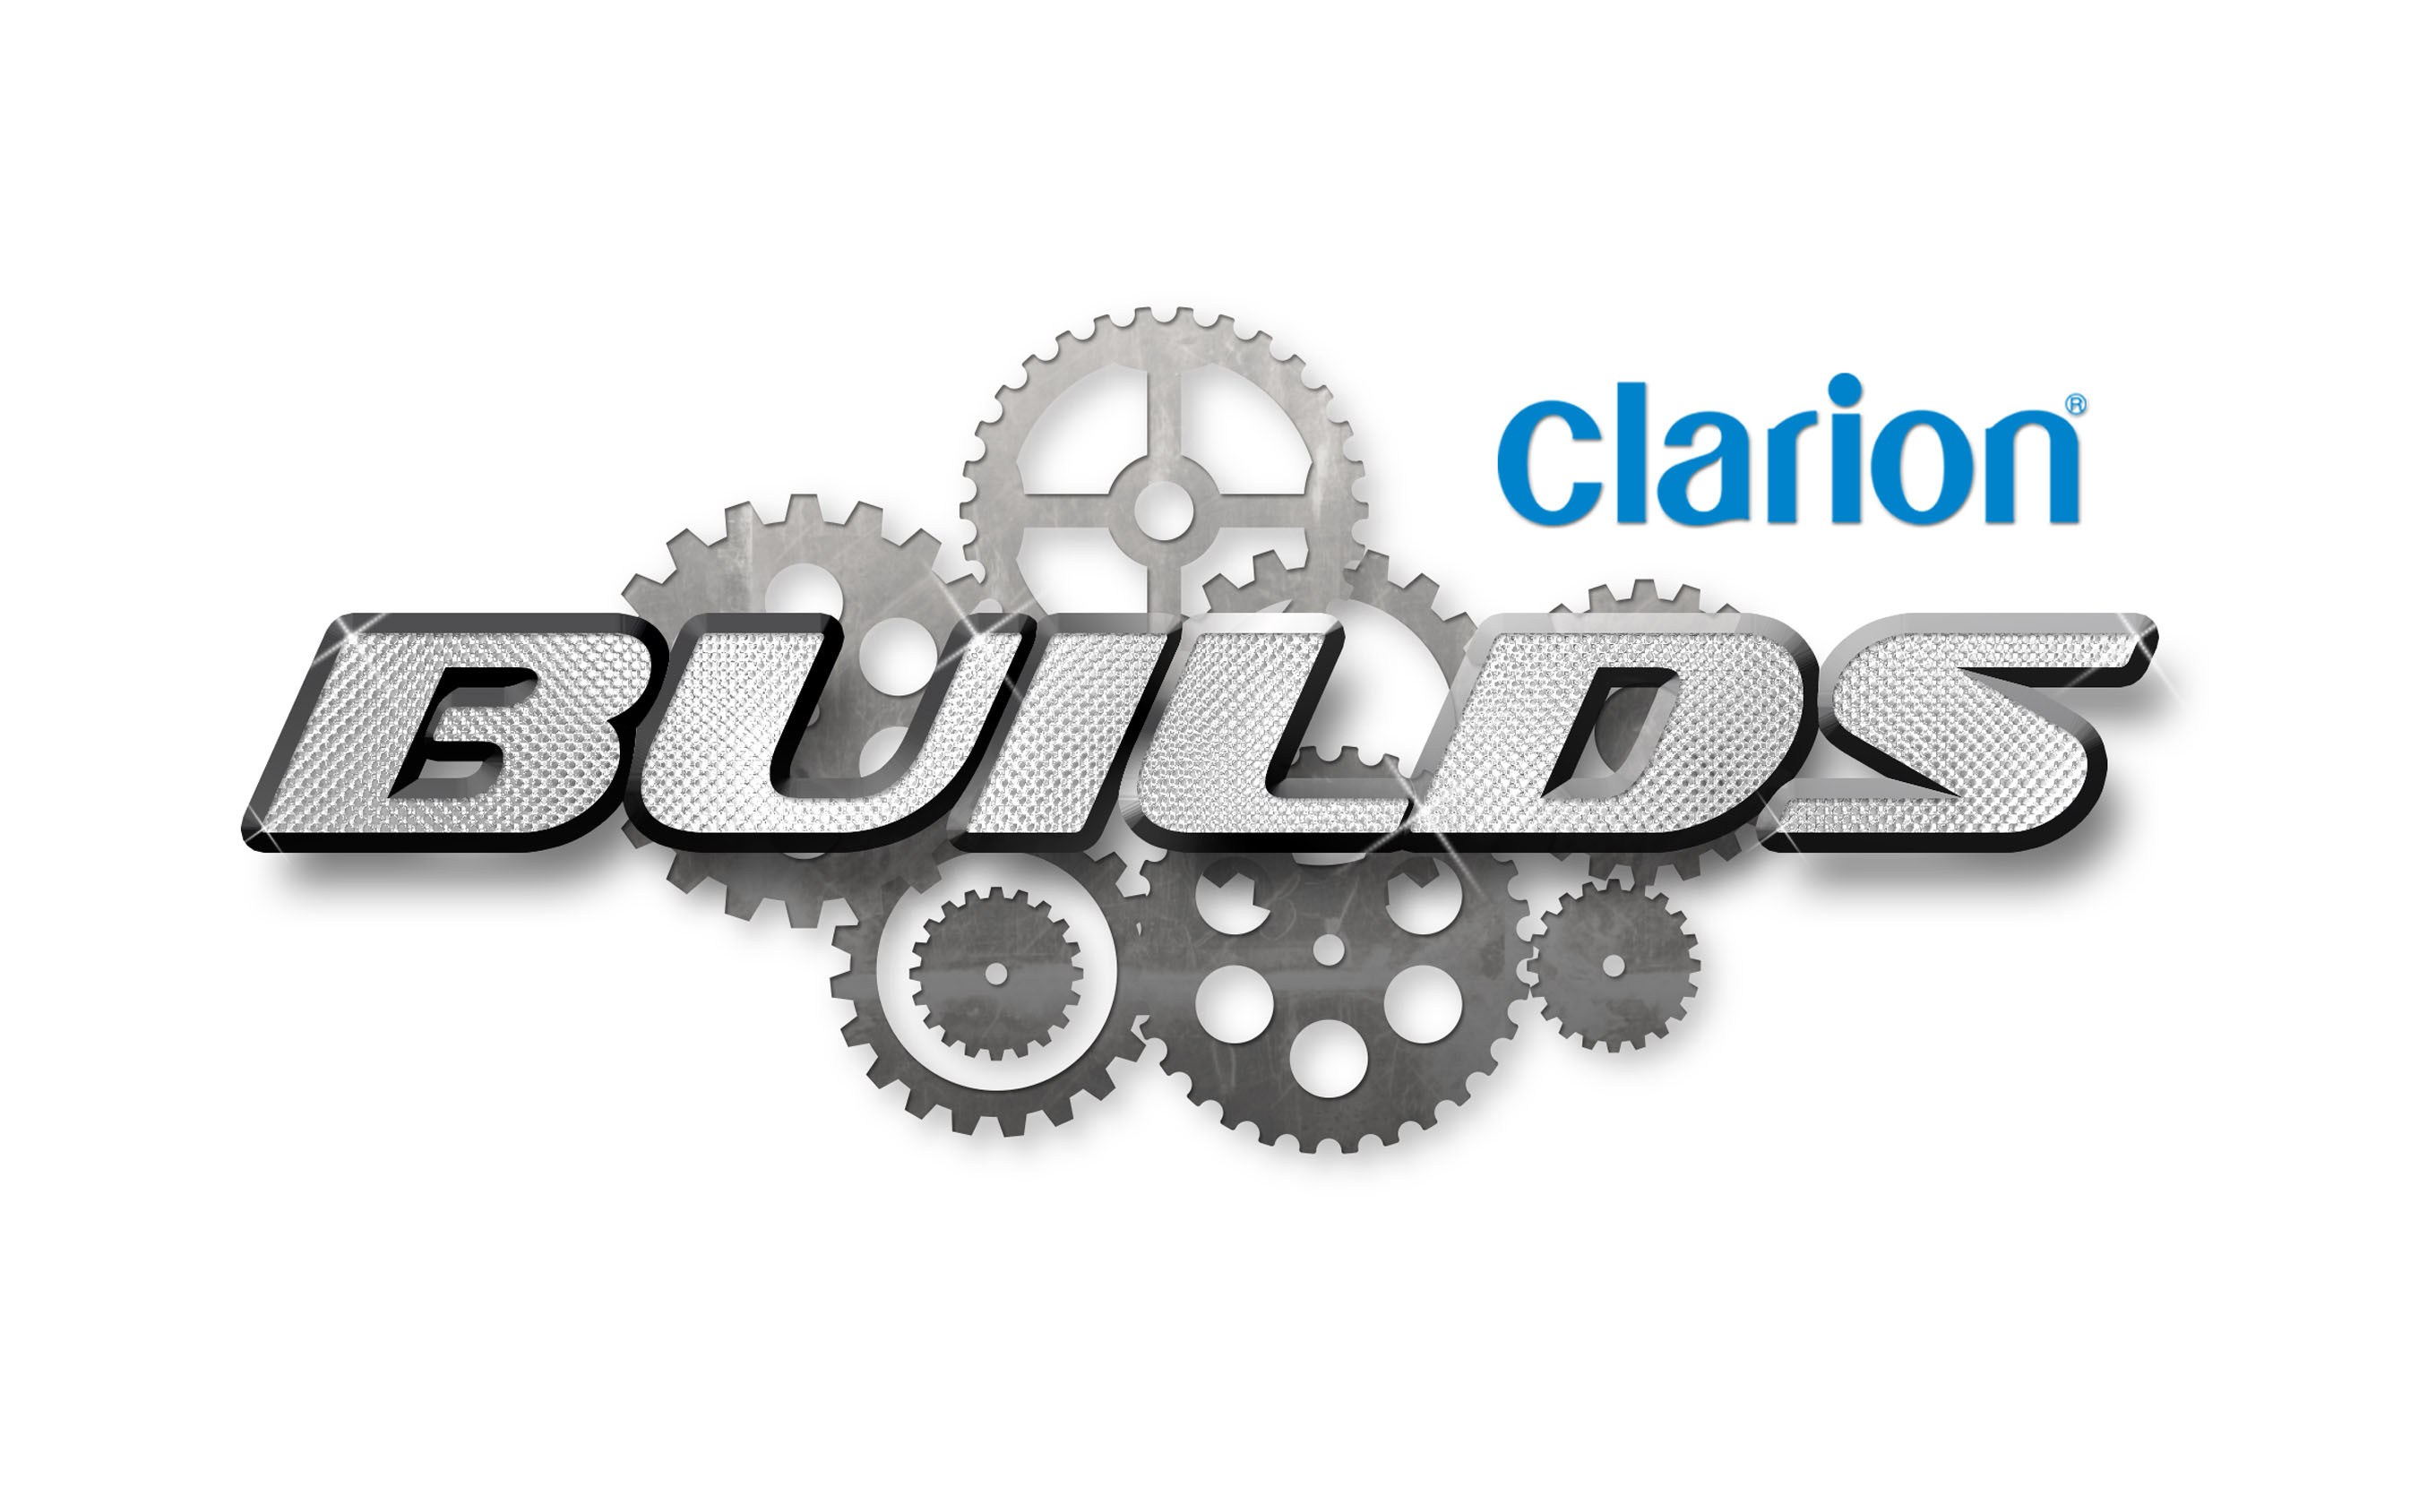 Clarion Builds is an innovative marketing program initiated by Clarion Corporation of America to tackle unique restoration projects of iconic cars and trucks in cooperation with key partners hand-selected for each individual project. The program is designed to connect with new and existing fans who are car enthusiasts, automotive sports fans, journalists, historians, and anyone with an interest in design and style, through a mix of social and traditional media. http://www.clarionbuilds.com/.